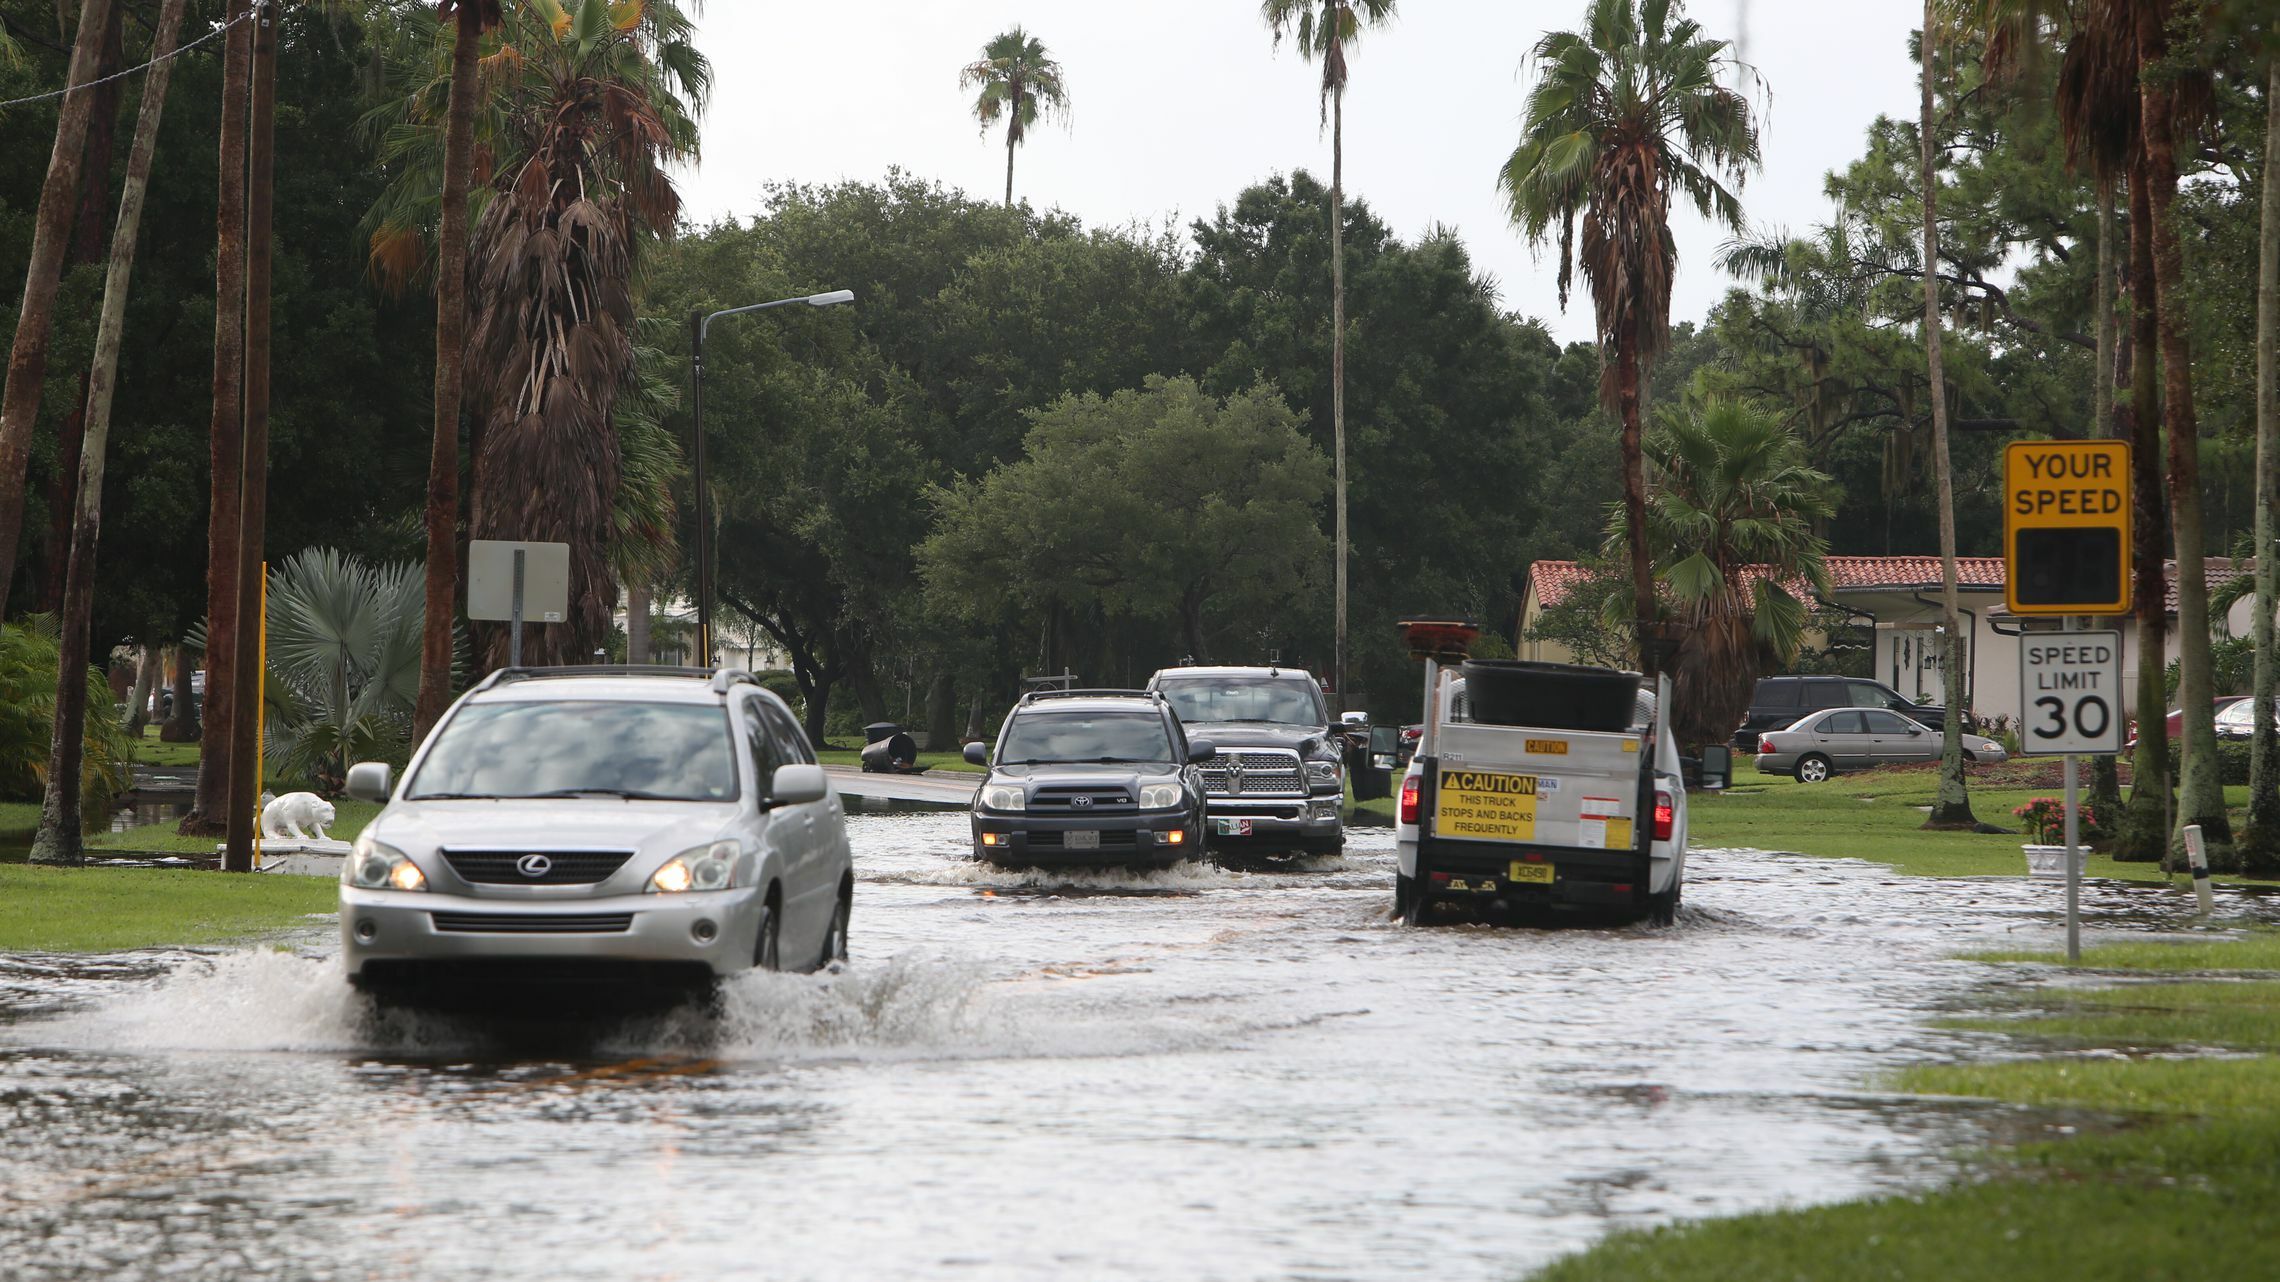 A flooded Snell Isle Boulevard in Saint Petersburg, Florida, in 2015.